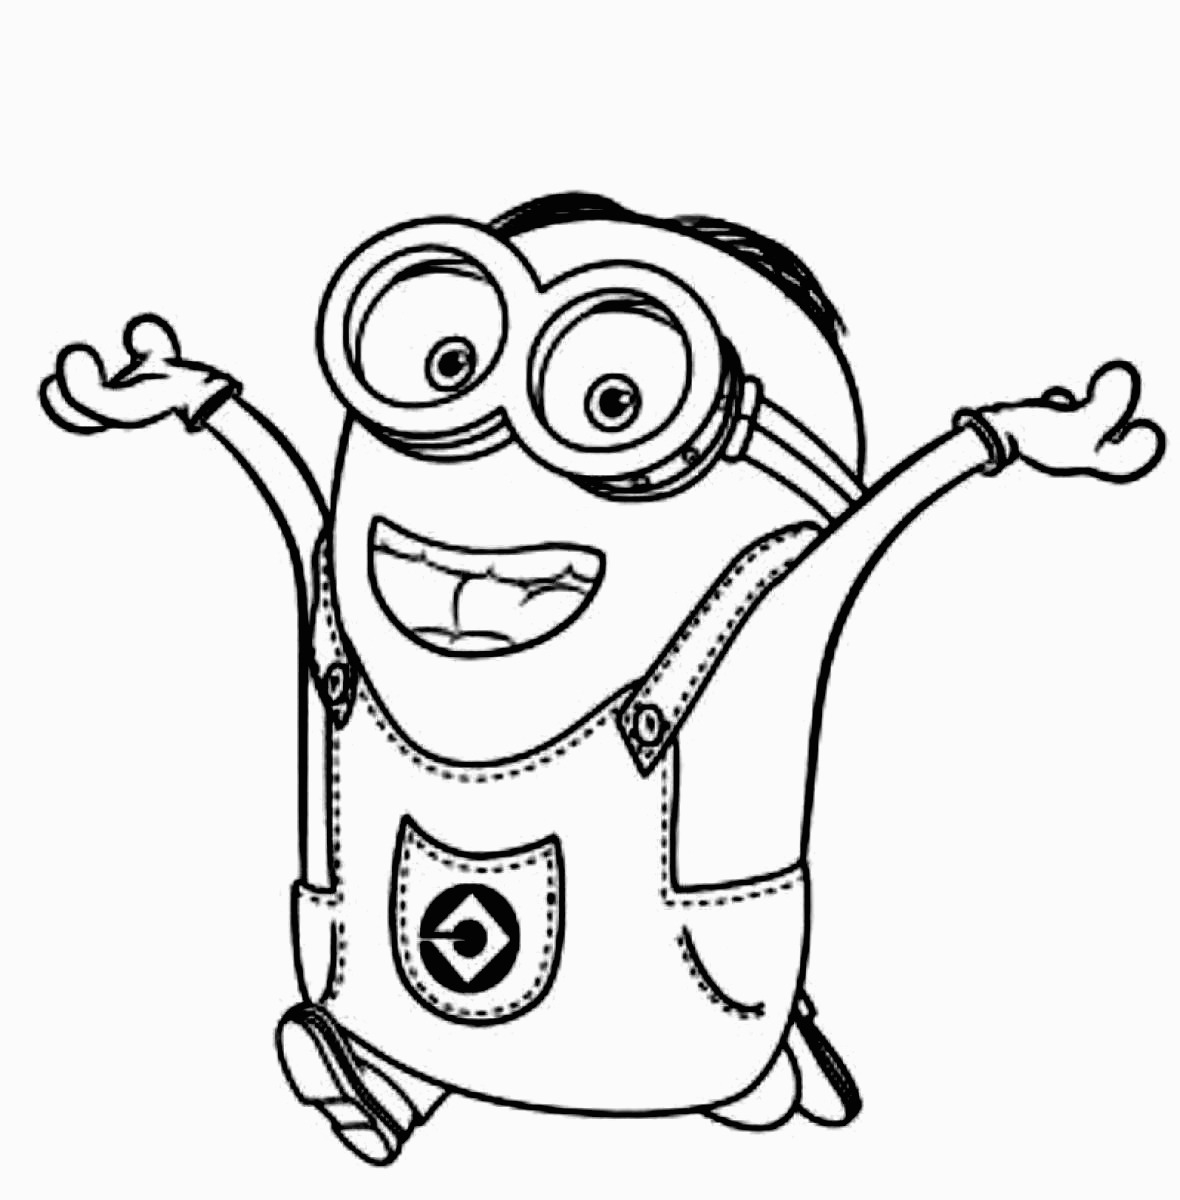 Despicable Coloring Pages Free Printable Despicable Me Coloring Pages For Kids For Despicable